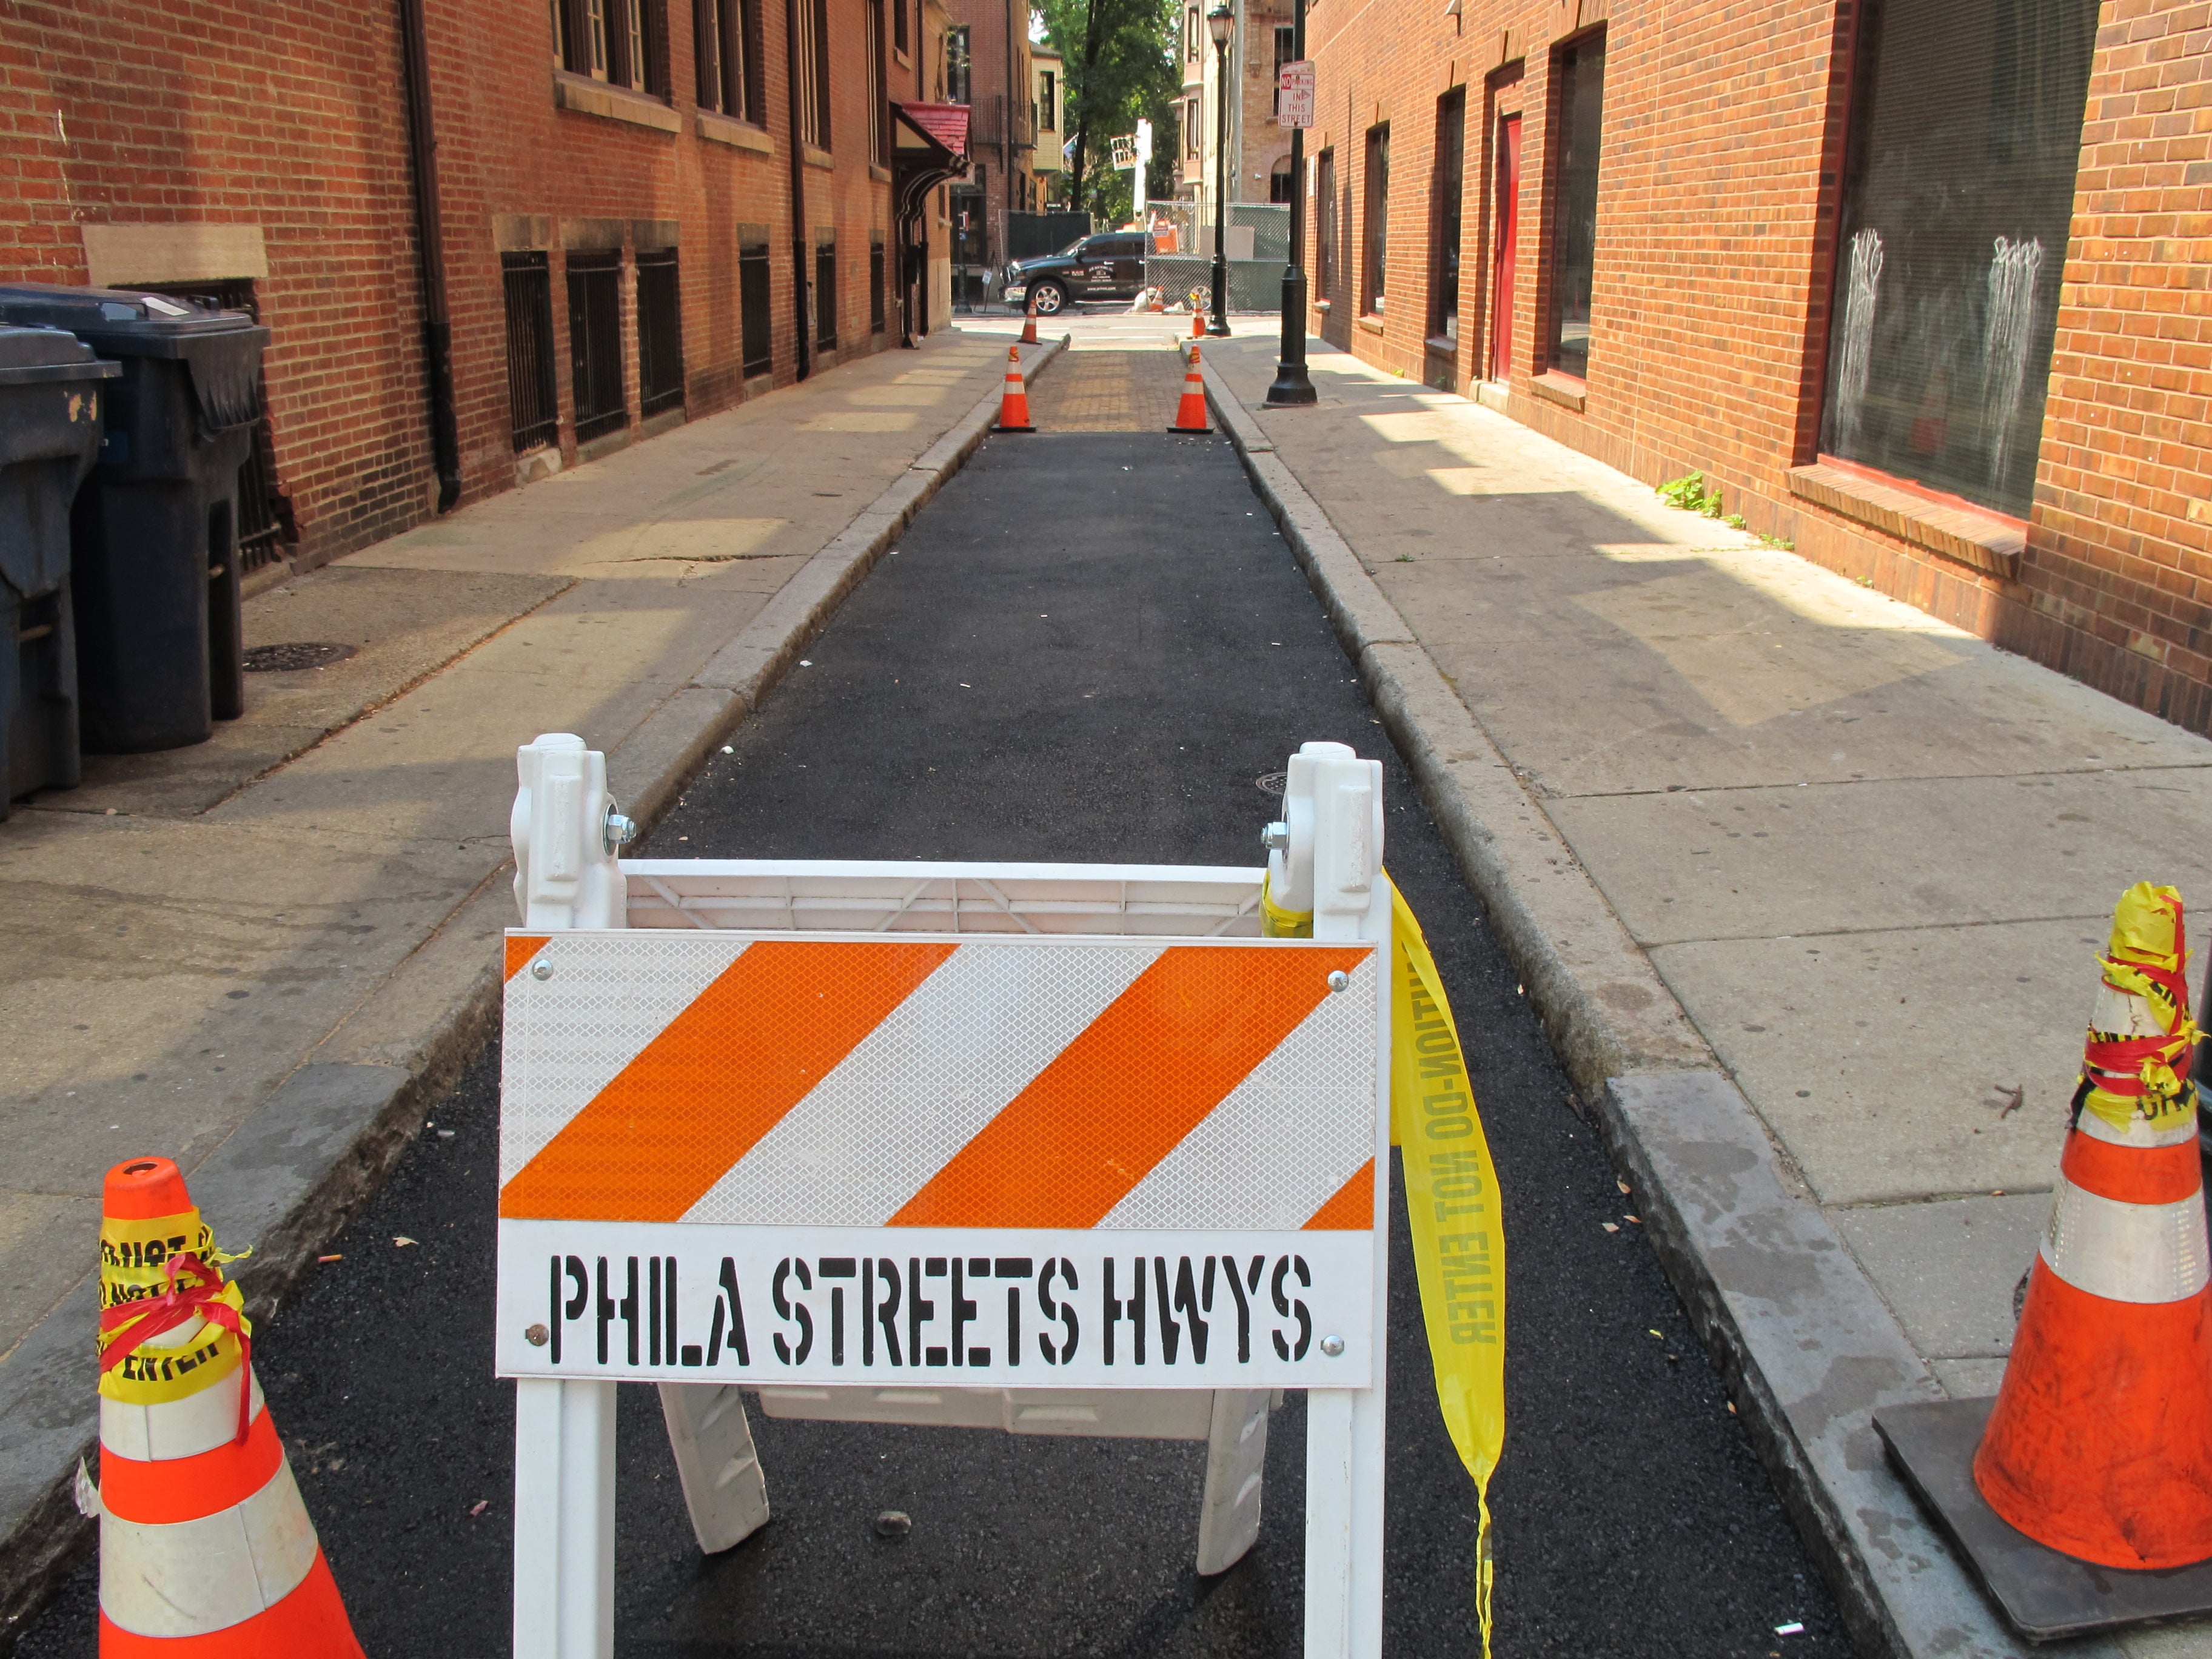 About one quarter of the block between Locust and Walnut was resurfaced in wood blocks, another quarter temporarily paved, and the rest left.